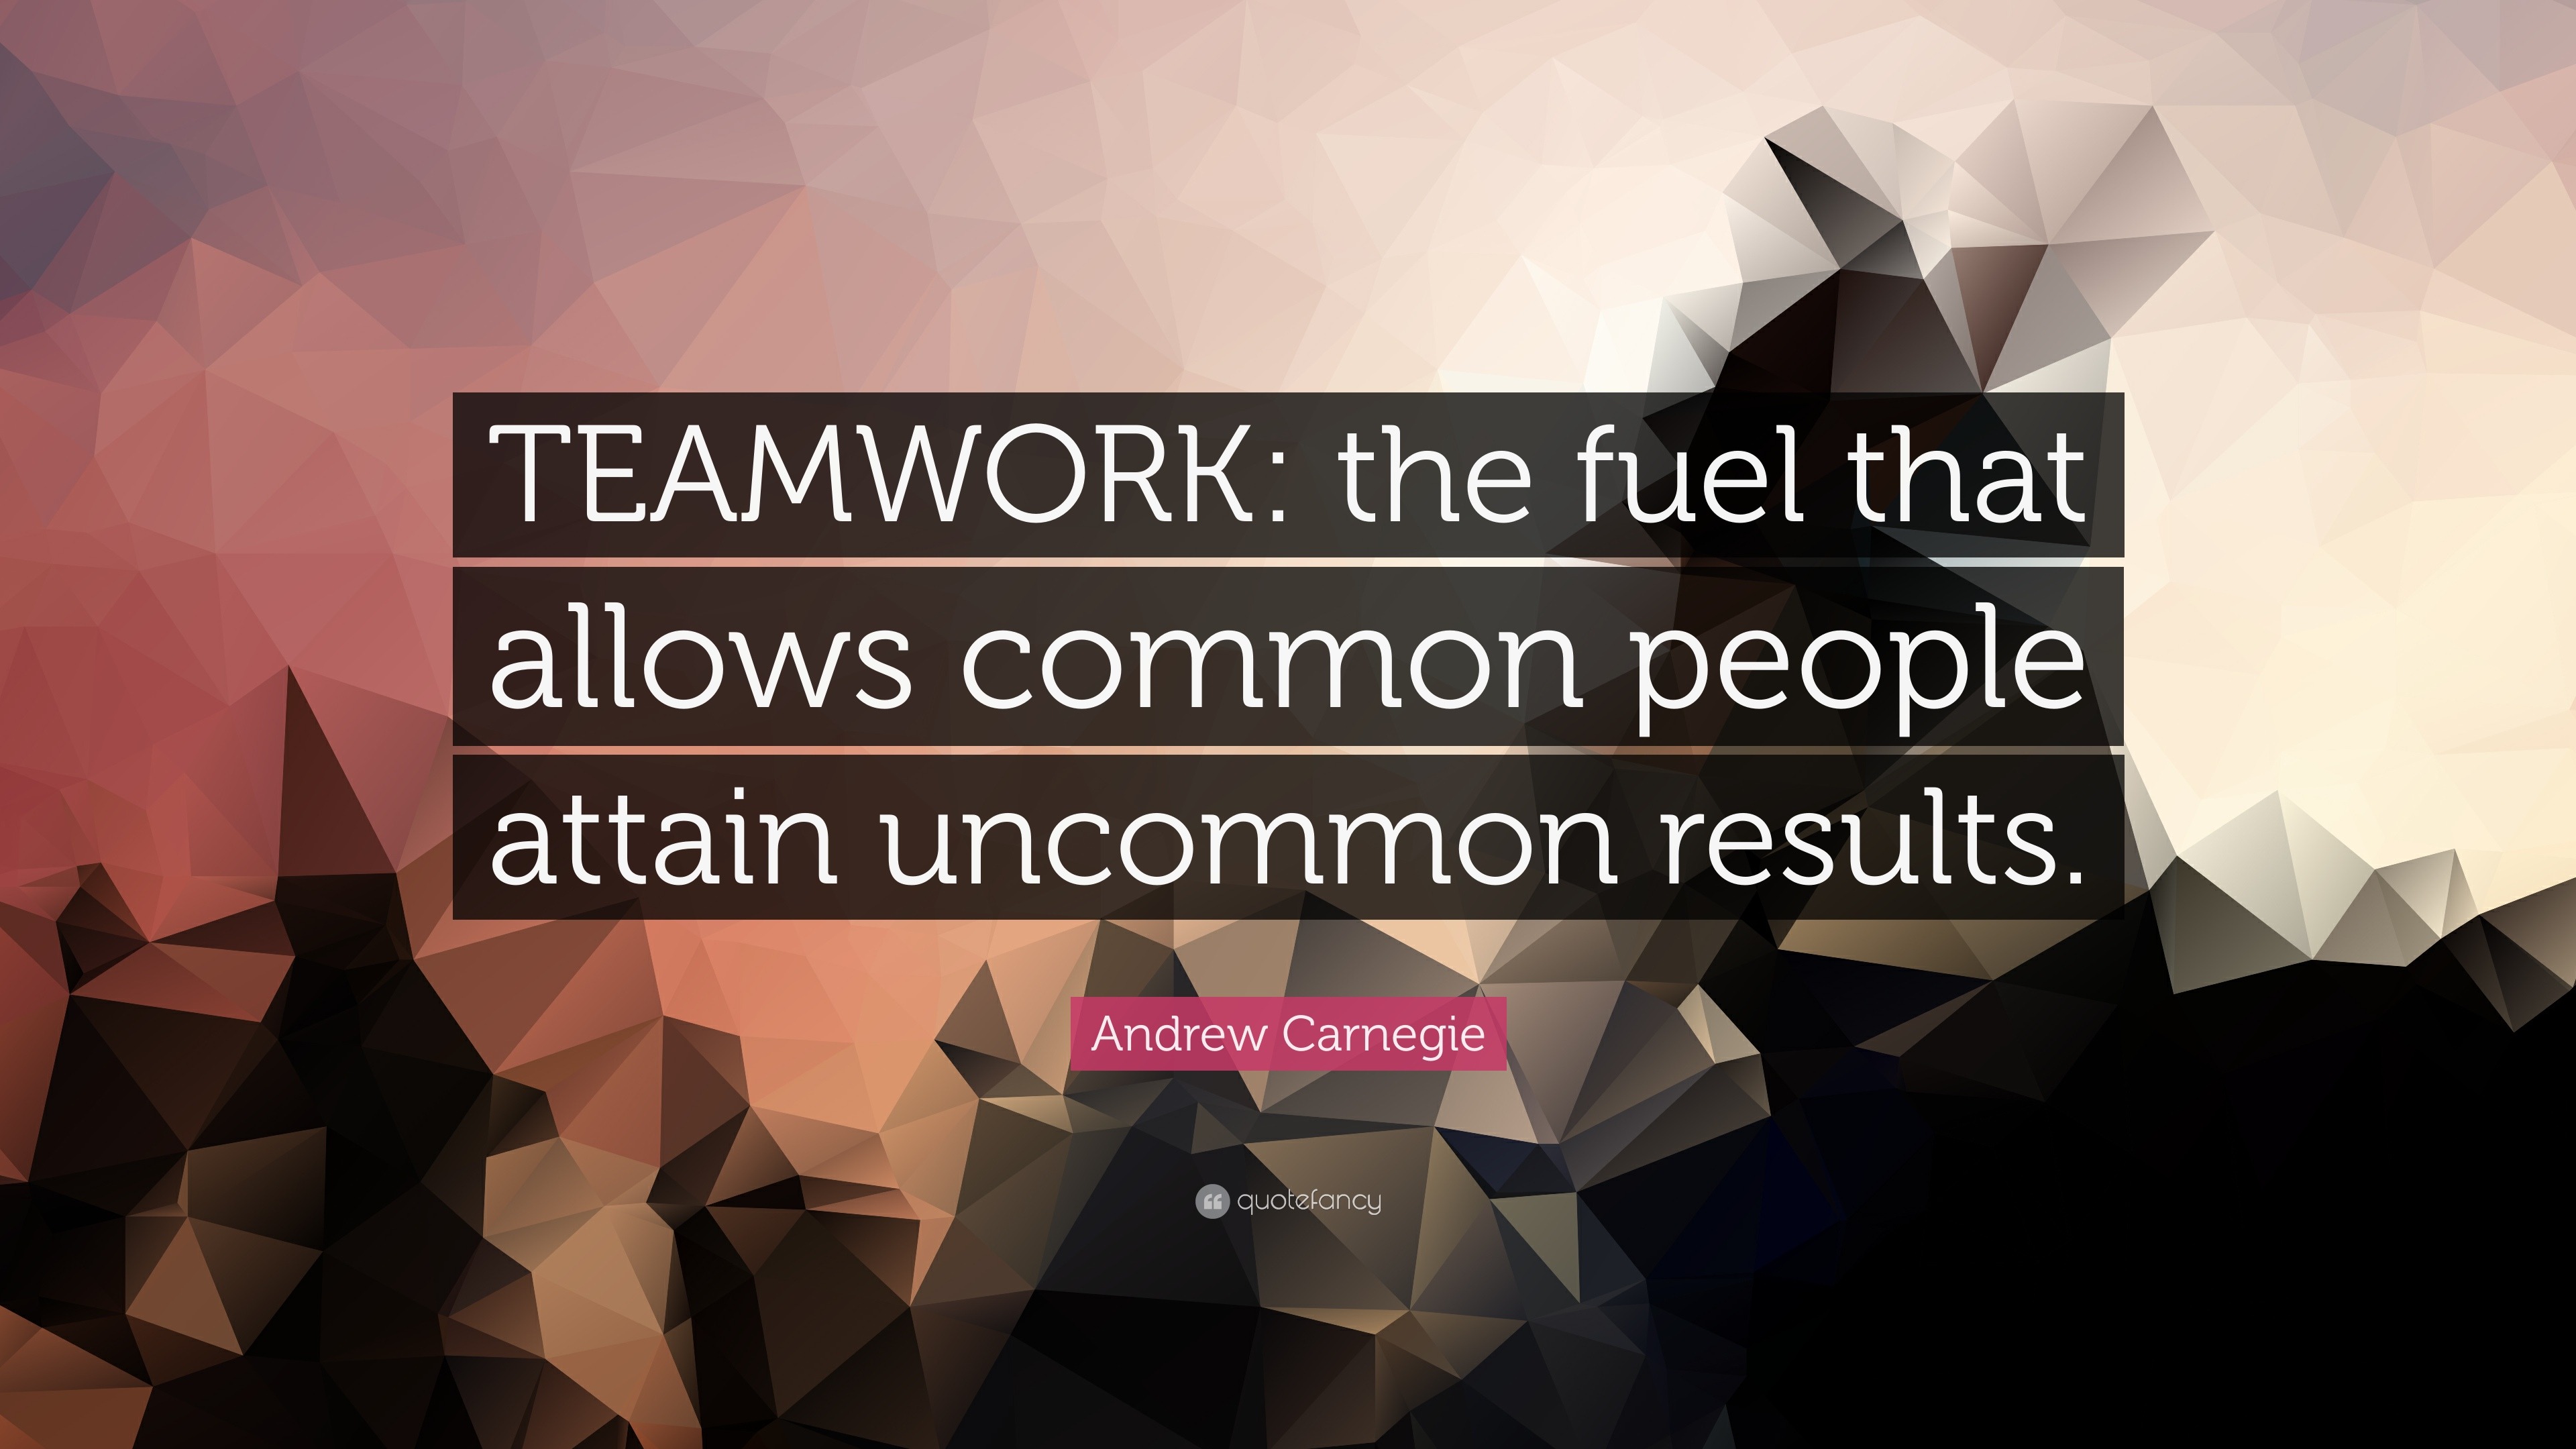 Andrew Carnegie Quote: “TEAMWORK: the fuel that allows common people ...